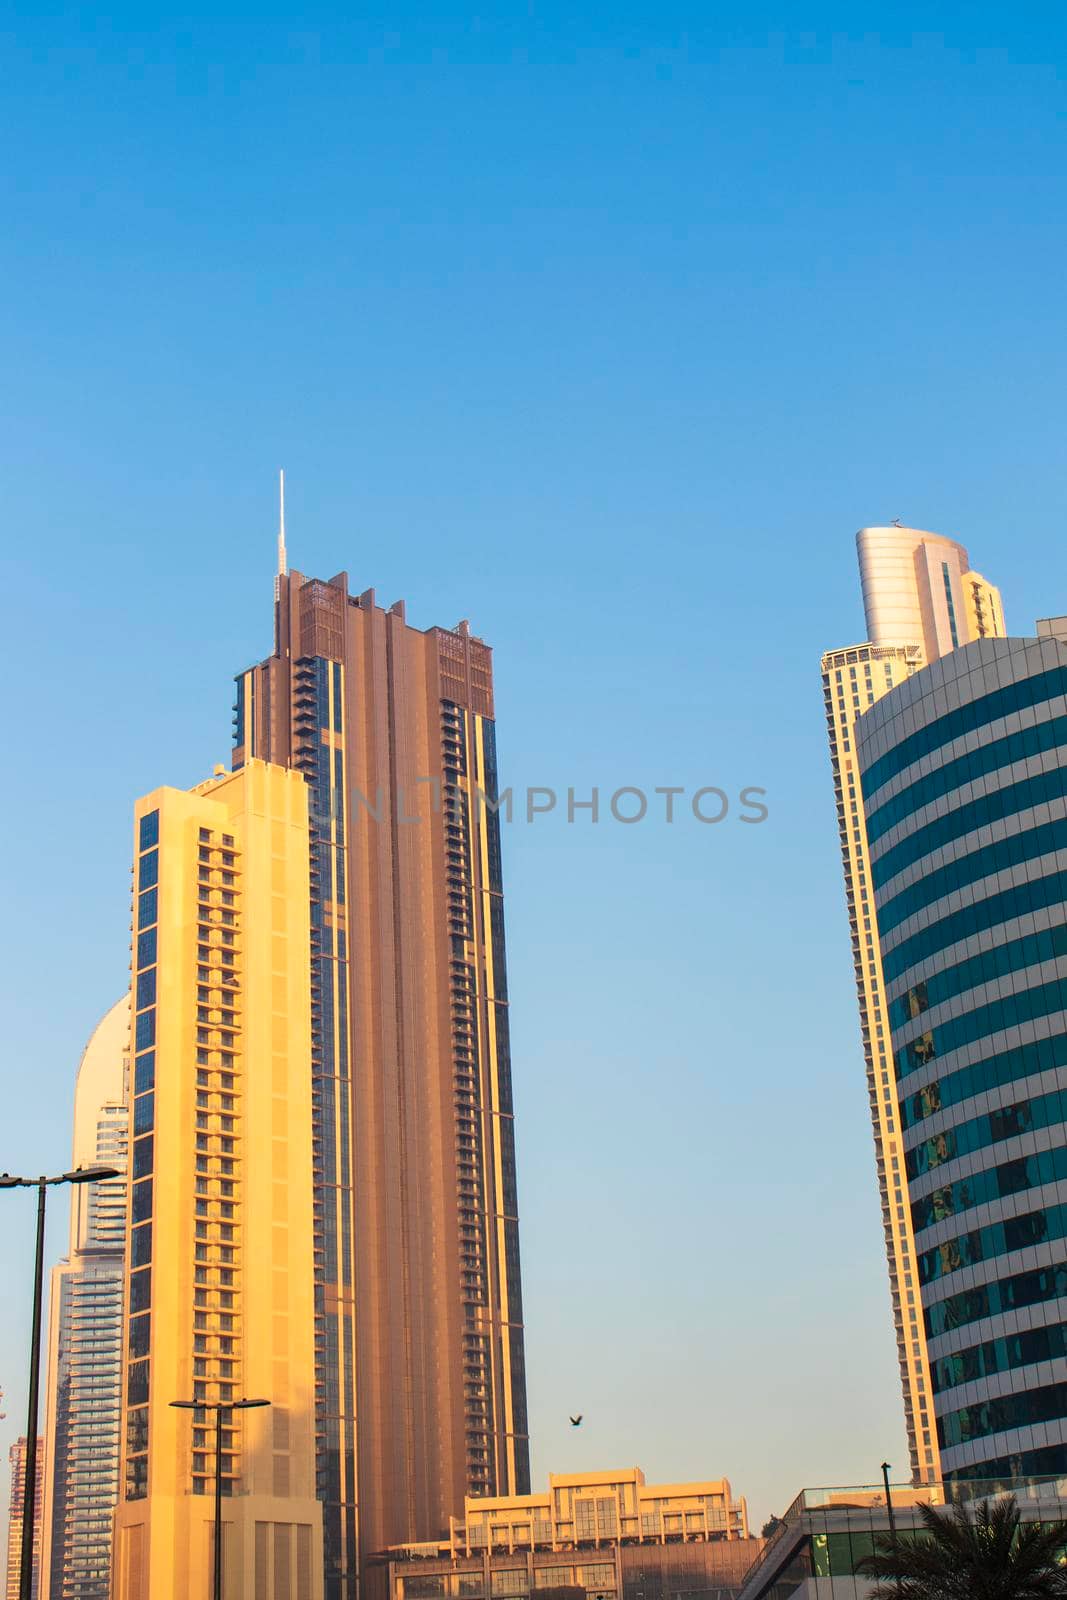 Dubai, UAE - 01.15.2021 Morning hour in Business bay district , Marasi drive. Burj Khalifa, tallest building in the world can be seen in the scene